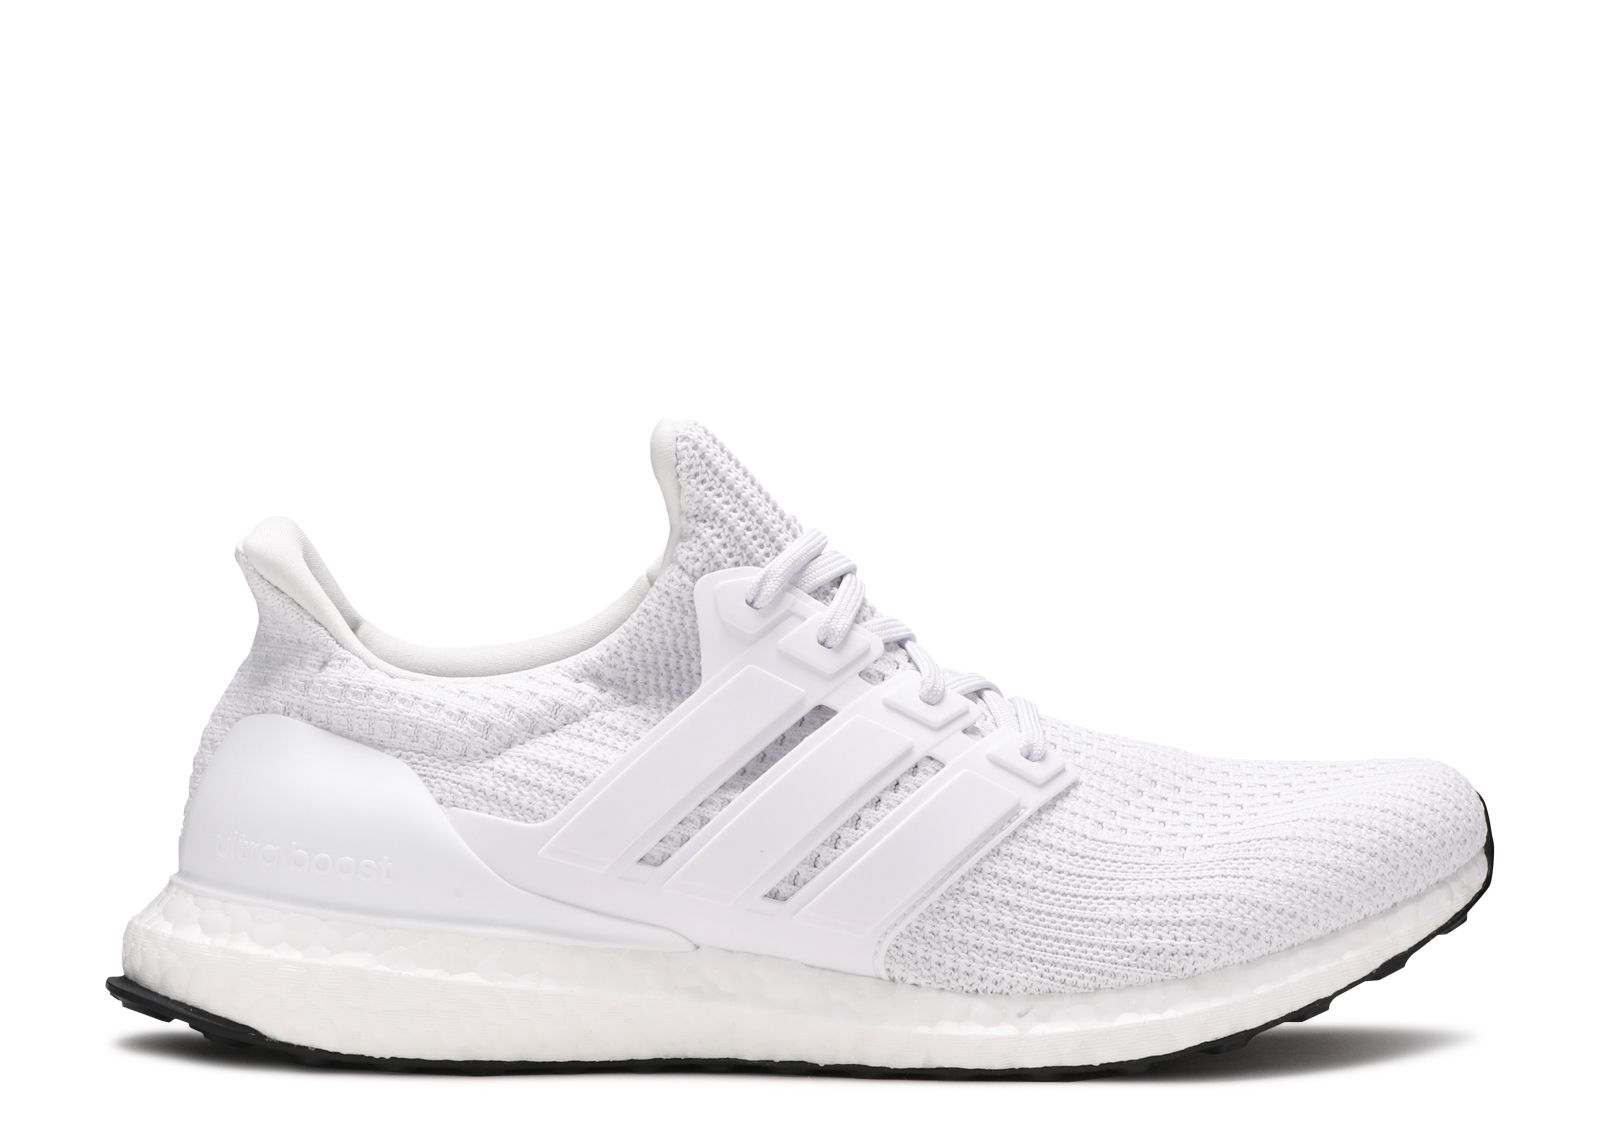 UltraBoost 4.0 DNA 'Cloud White' - Adidas - FY9120 - cloud white